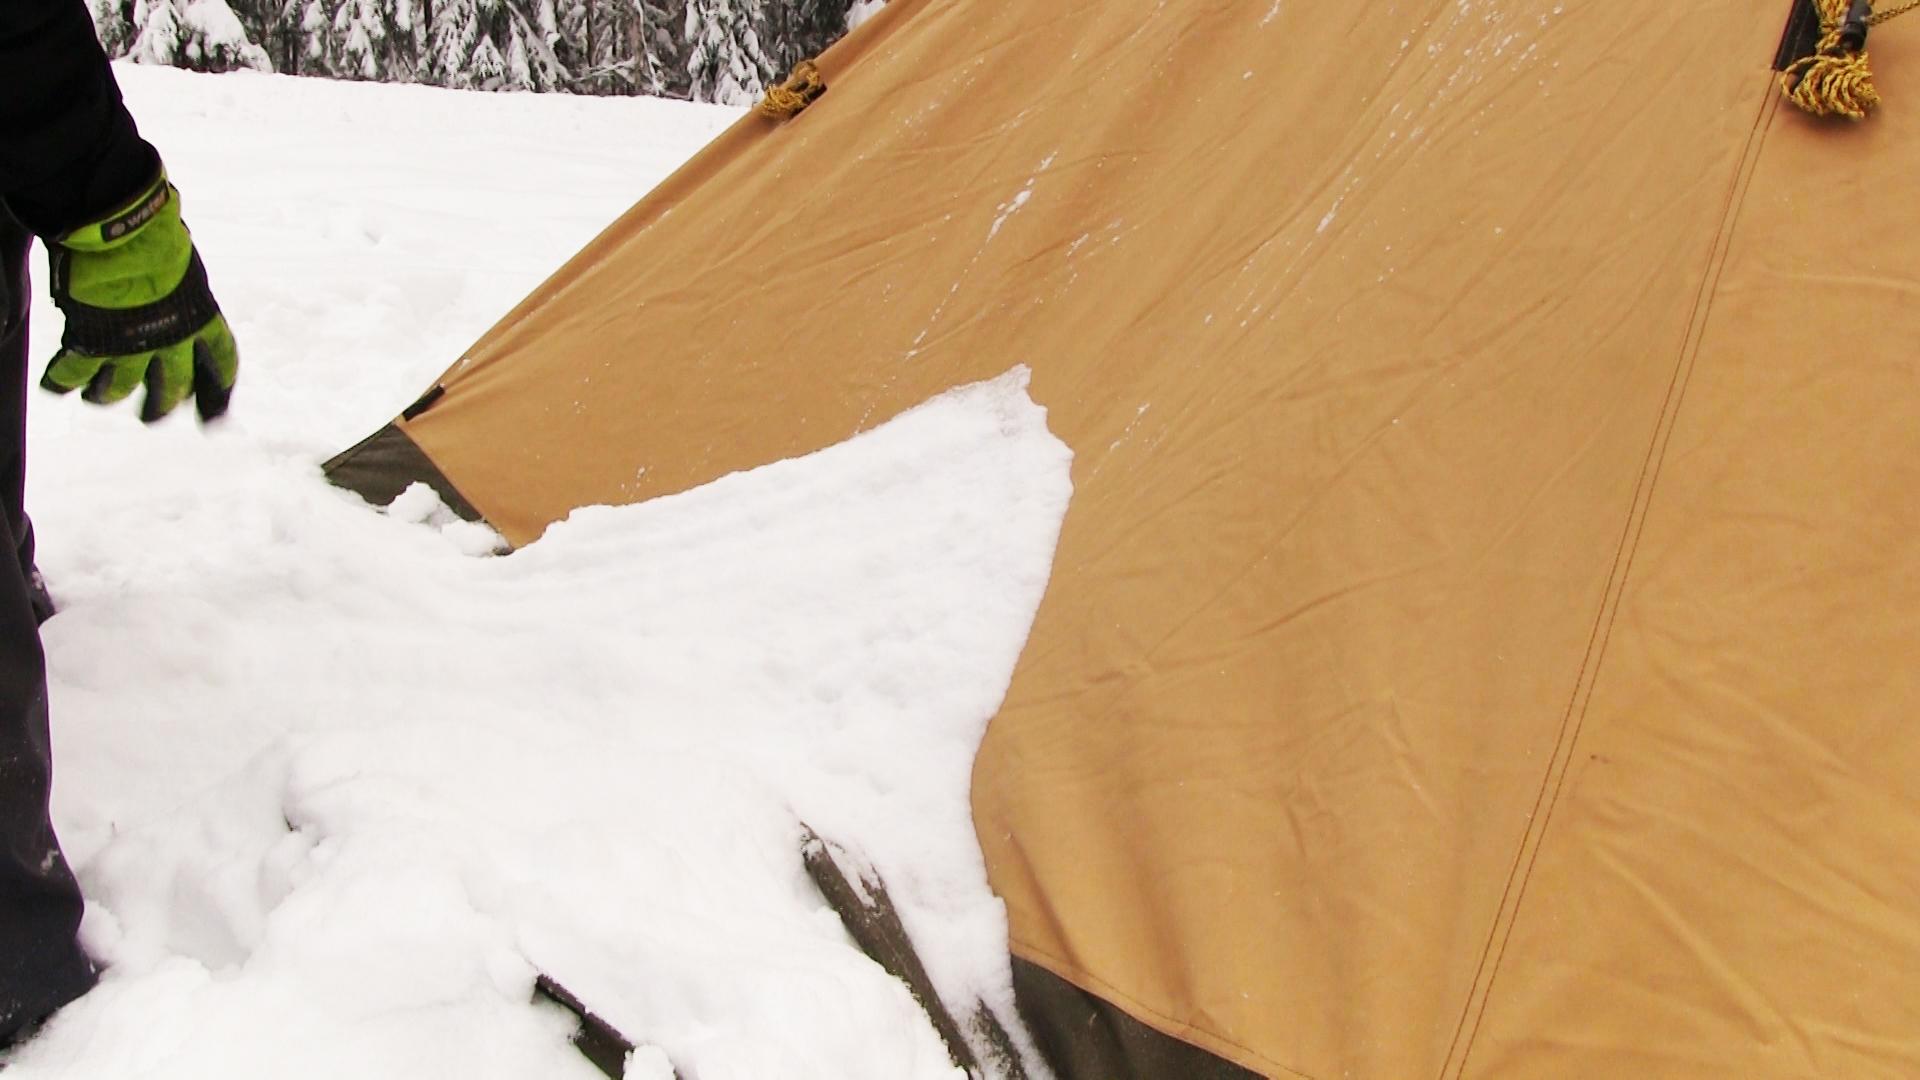 AA How to avoid damages from snow on the Nordic tipi snow build on tent wall